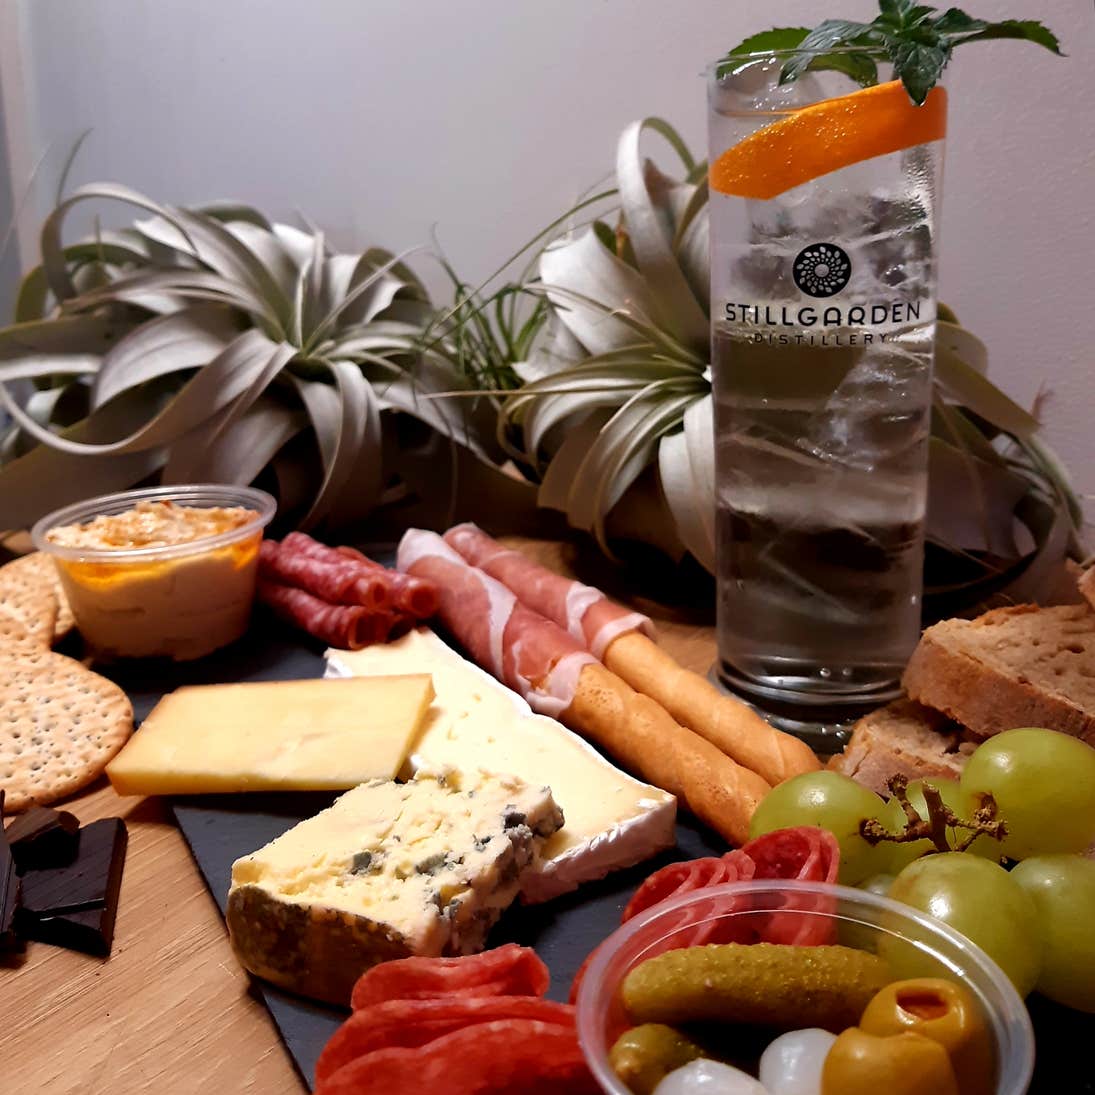 A cheese board on a piece of slate, decorated white various cheeses, cold meats and bread. Served with a glass of Stillgarden gin.